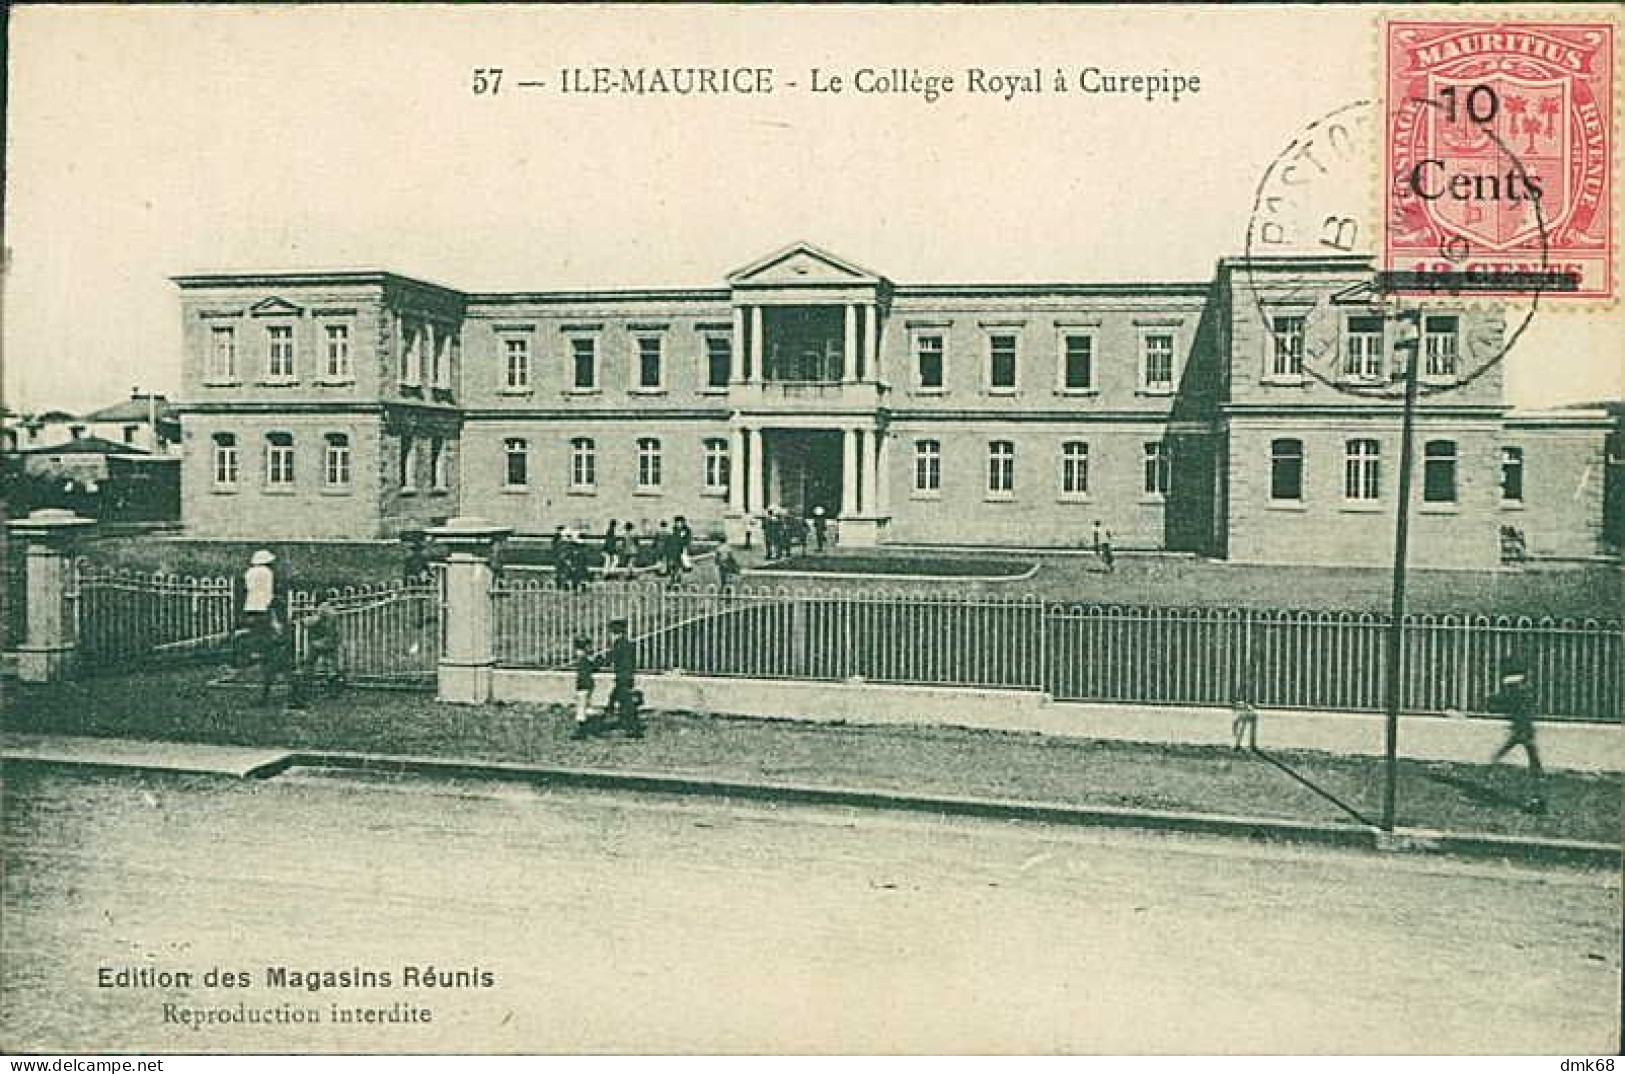 MAURITIUS / ILE MAURICE - LE COLLEGE ROYAL A CUREPIPE - EDIT. MAGASINS REUNIS - MAILED 1926 / OVERPRINT STAMP (12577) - Mauricio